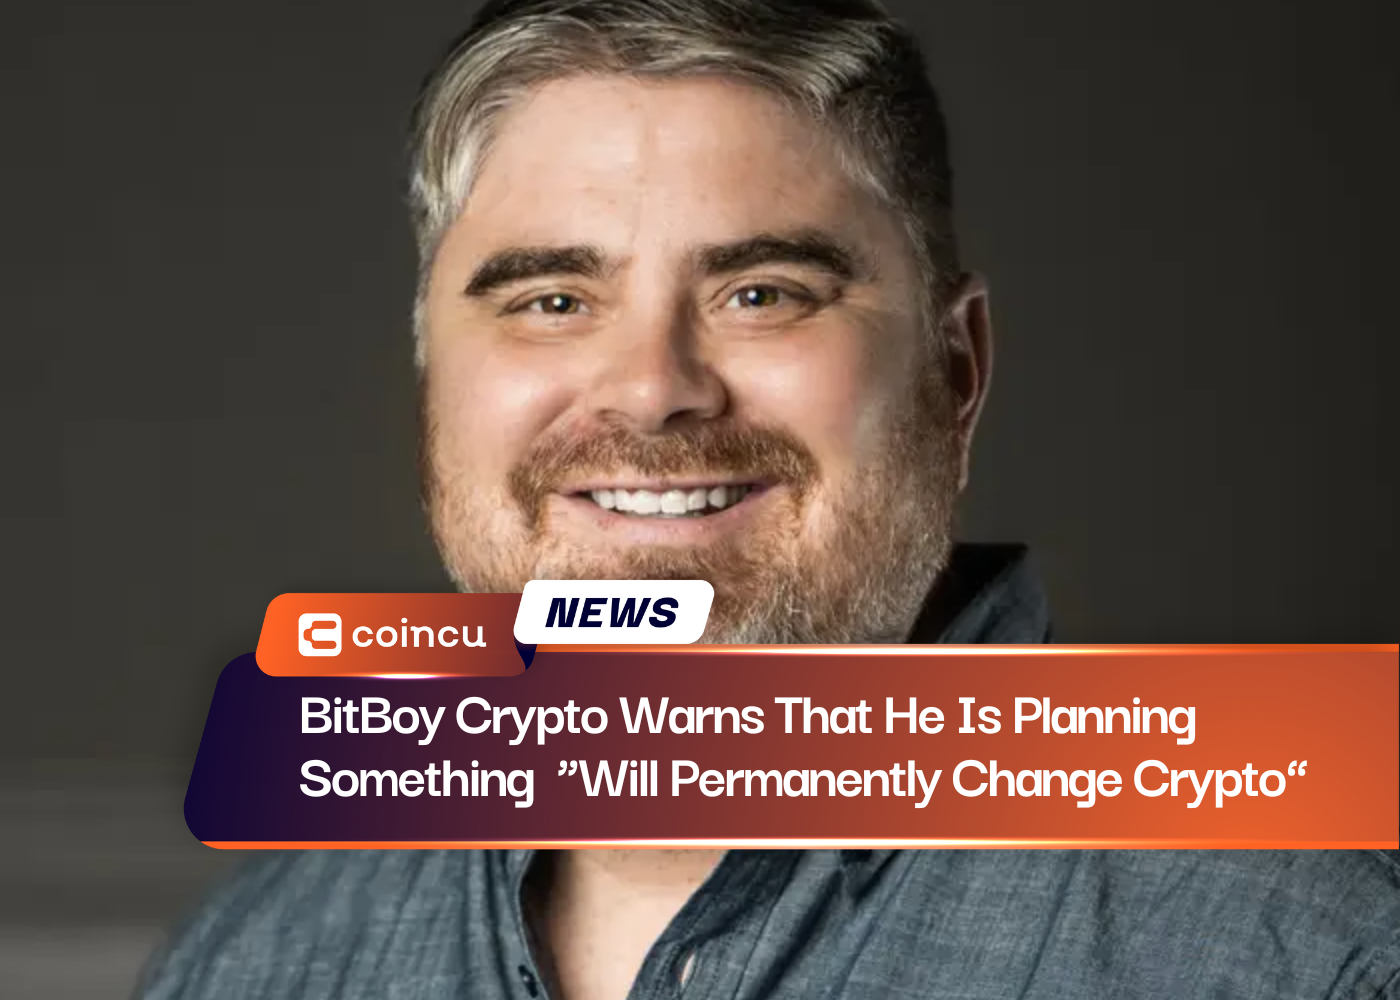 BitBoy Crypto Warns That He Is Planning Something “Will Permanently Change Crypto”